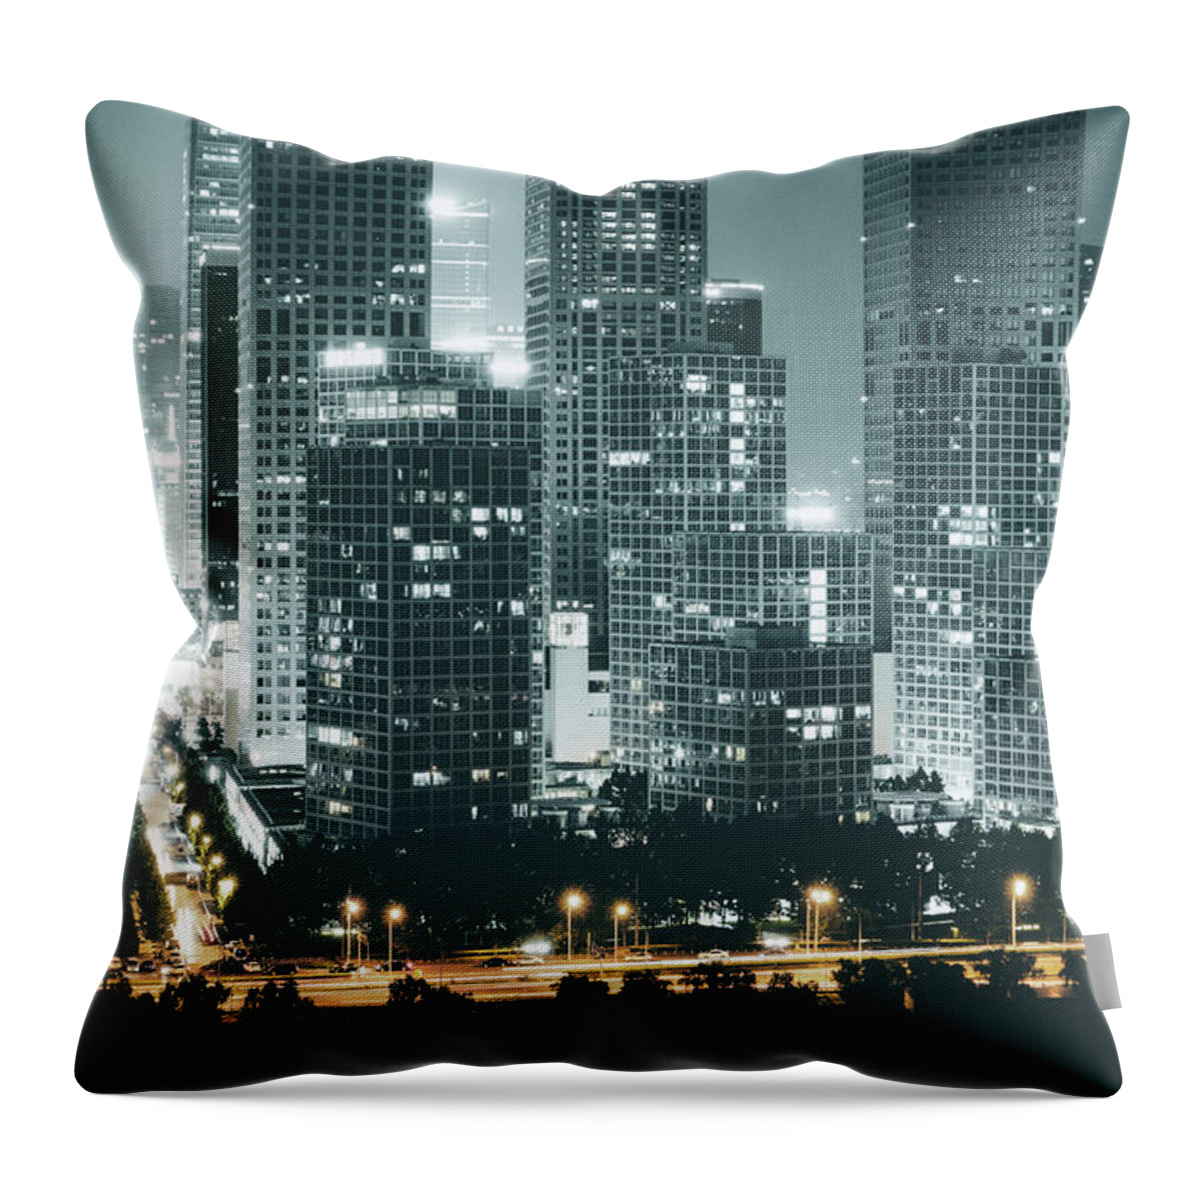 Downtown District Throw Pillow featuring the photograph City Night by Linghe Zhao